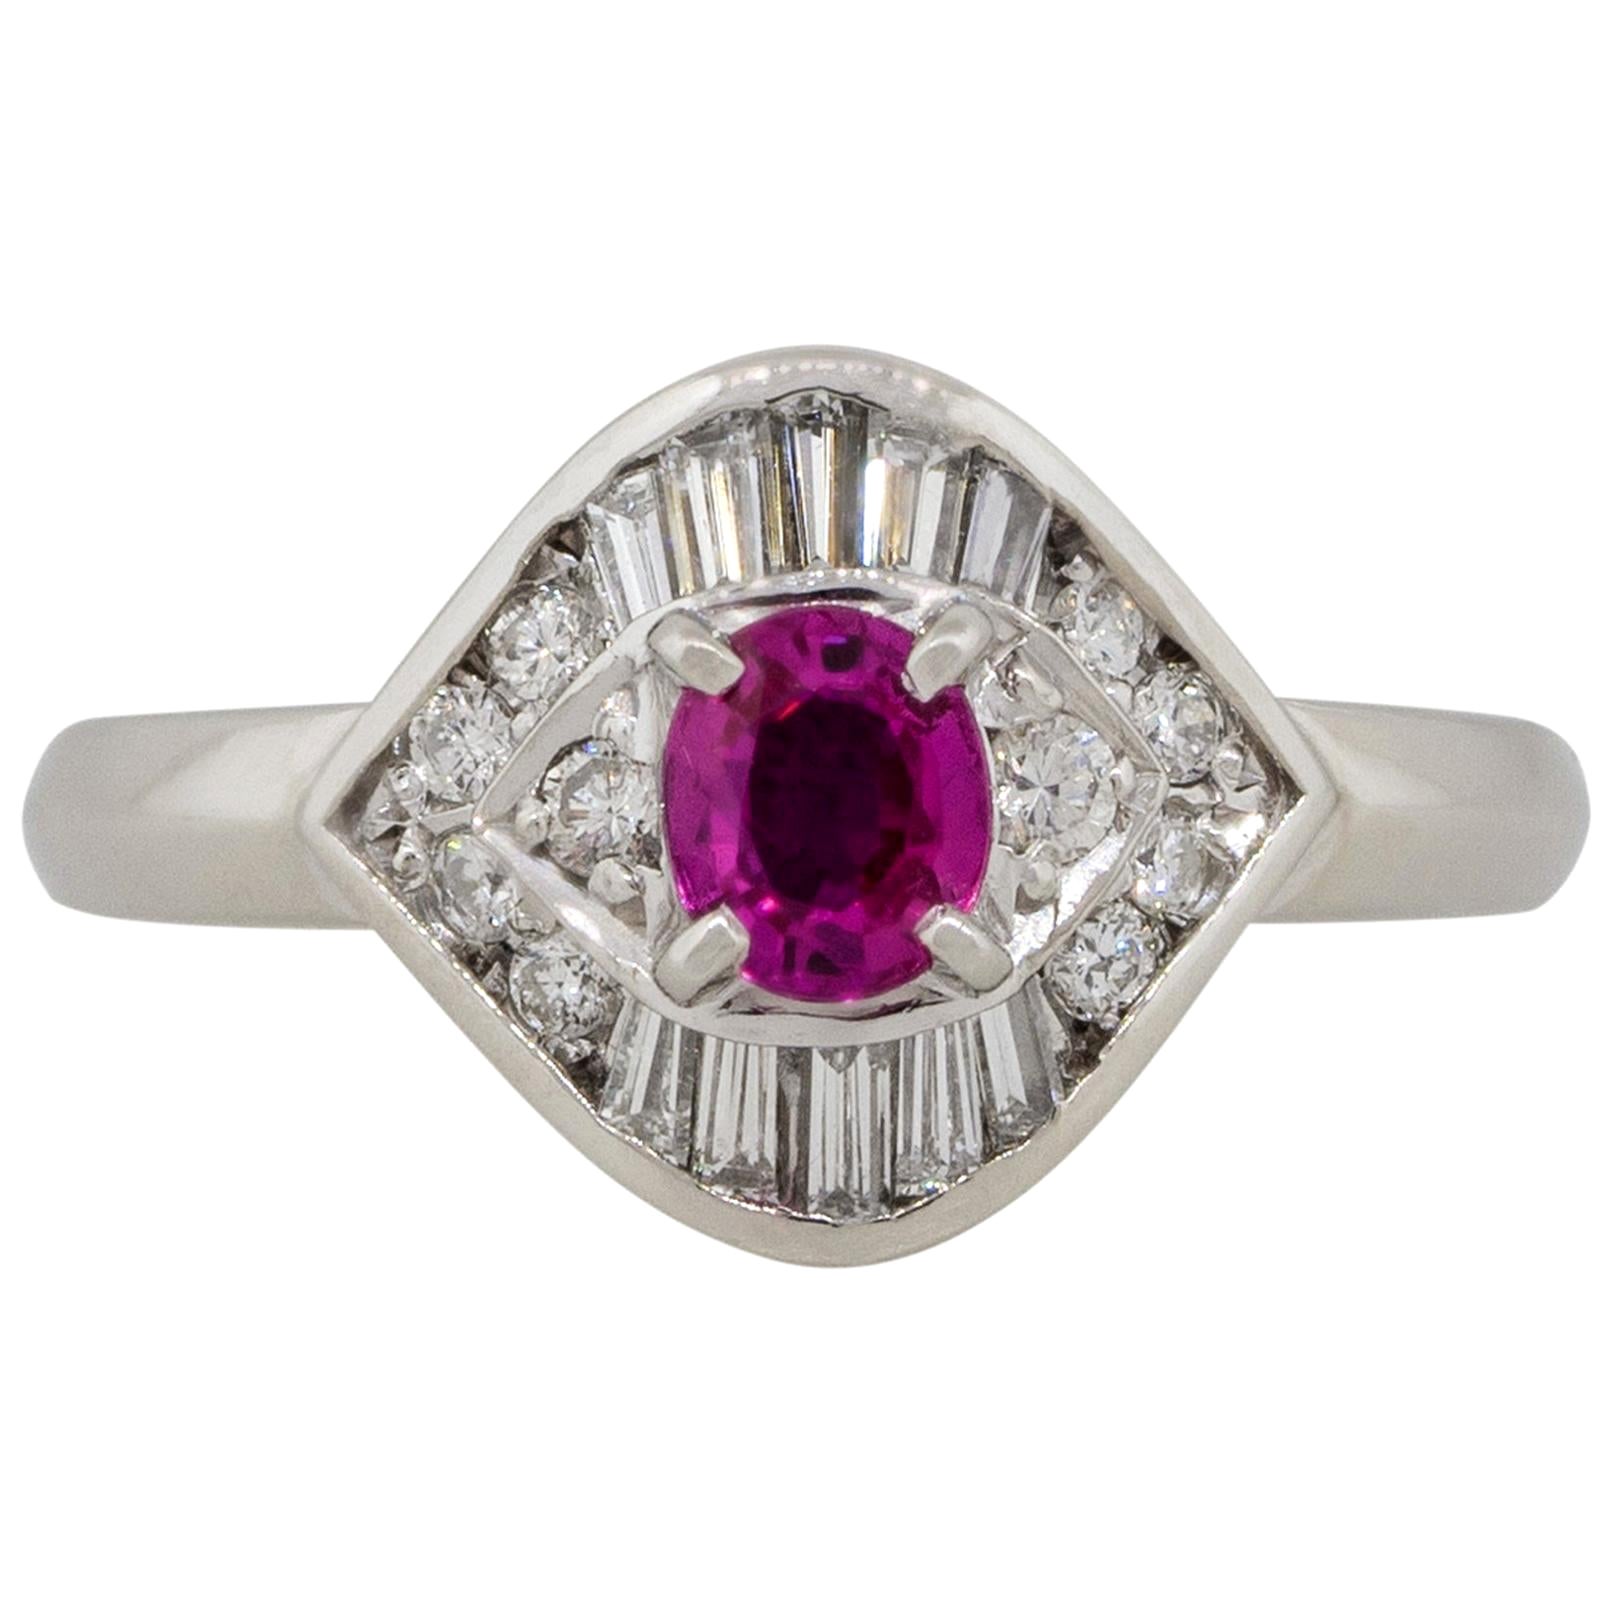 0.47 Carat Ruby Diamond Eye Cocktail Ring Platinum in Stock For Sale